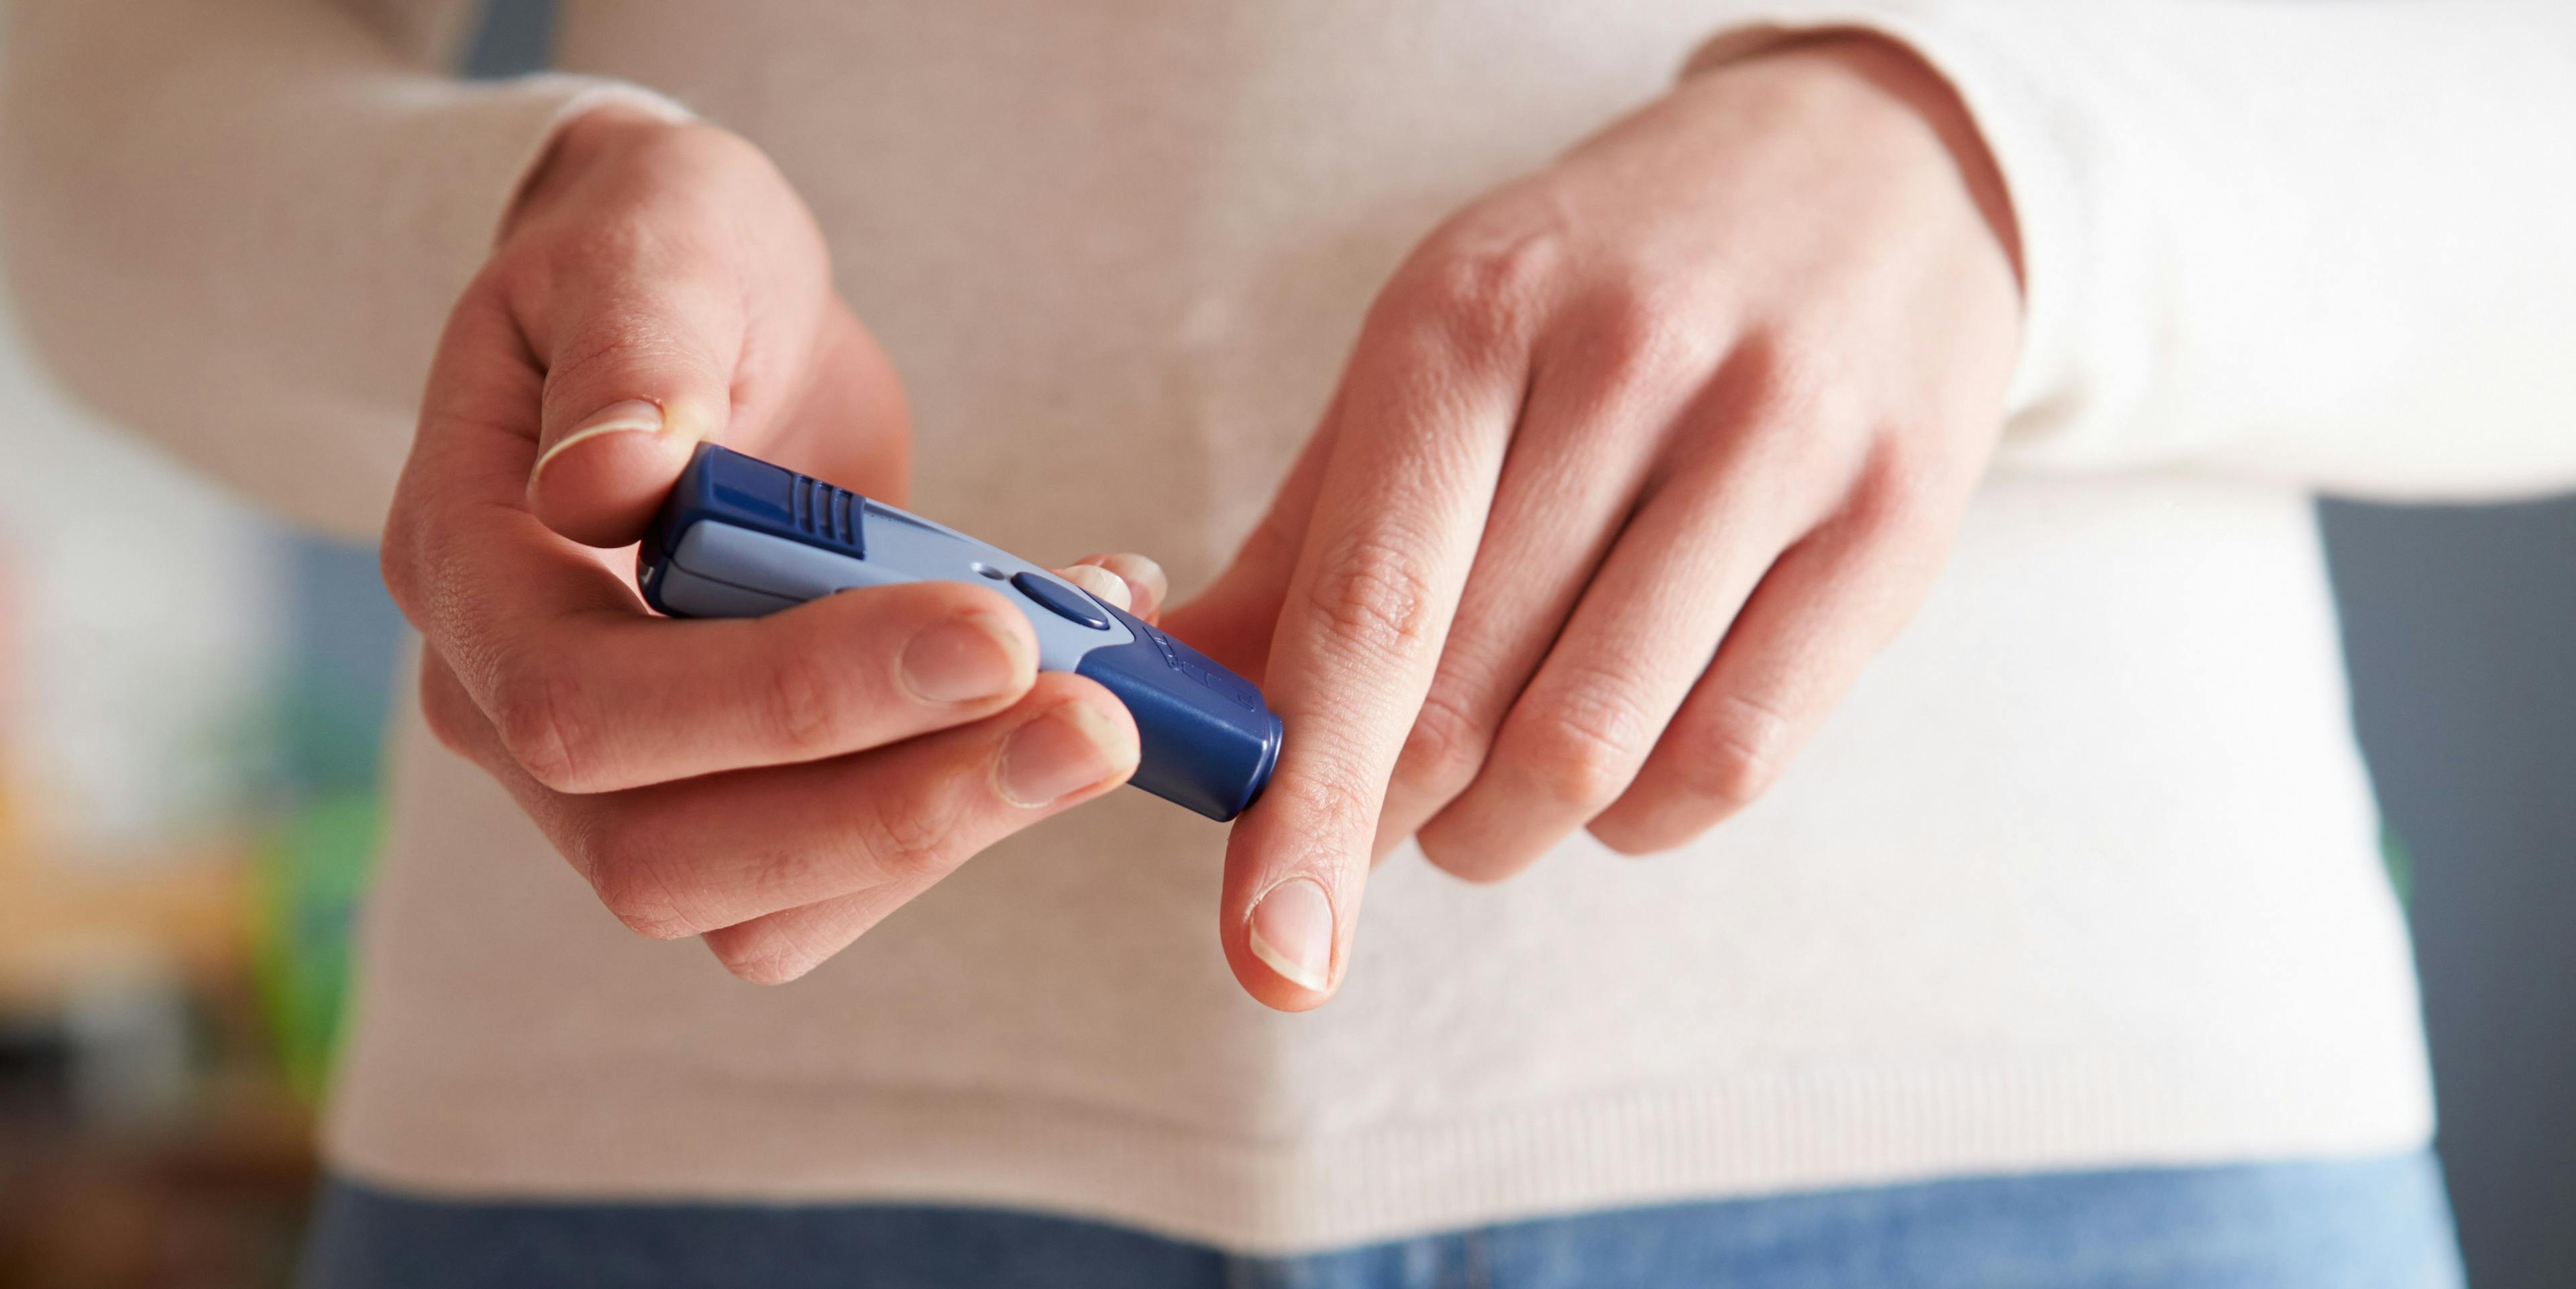 Type 2 Diabetes More Prevalent in Women with PTSD